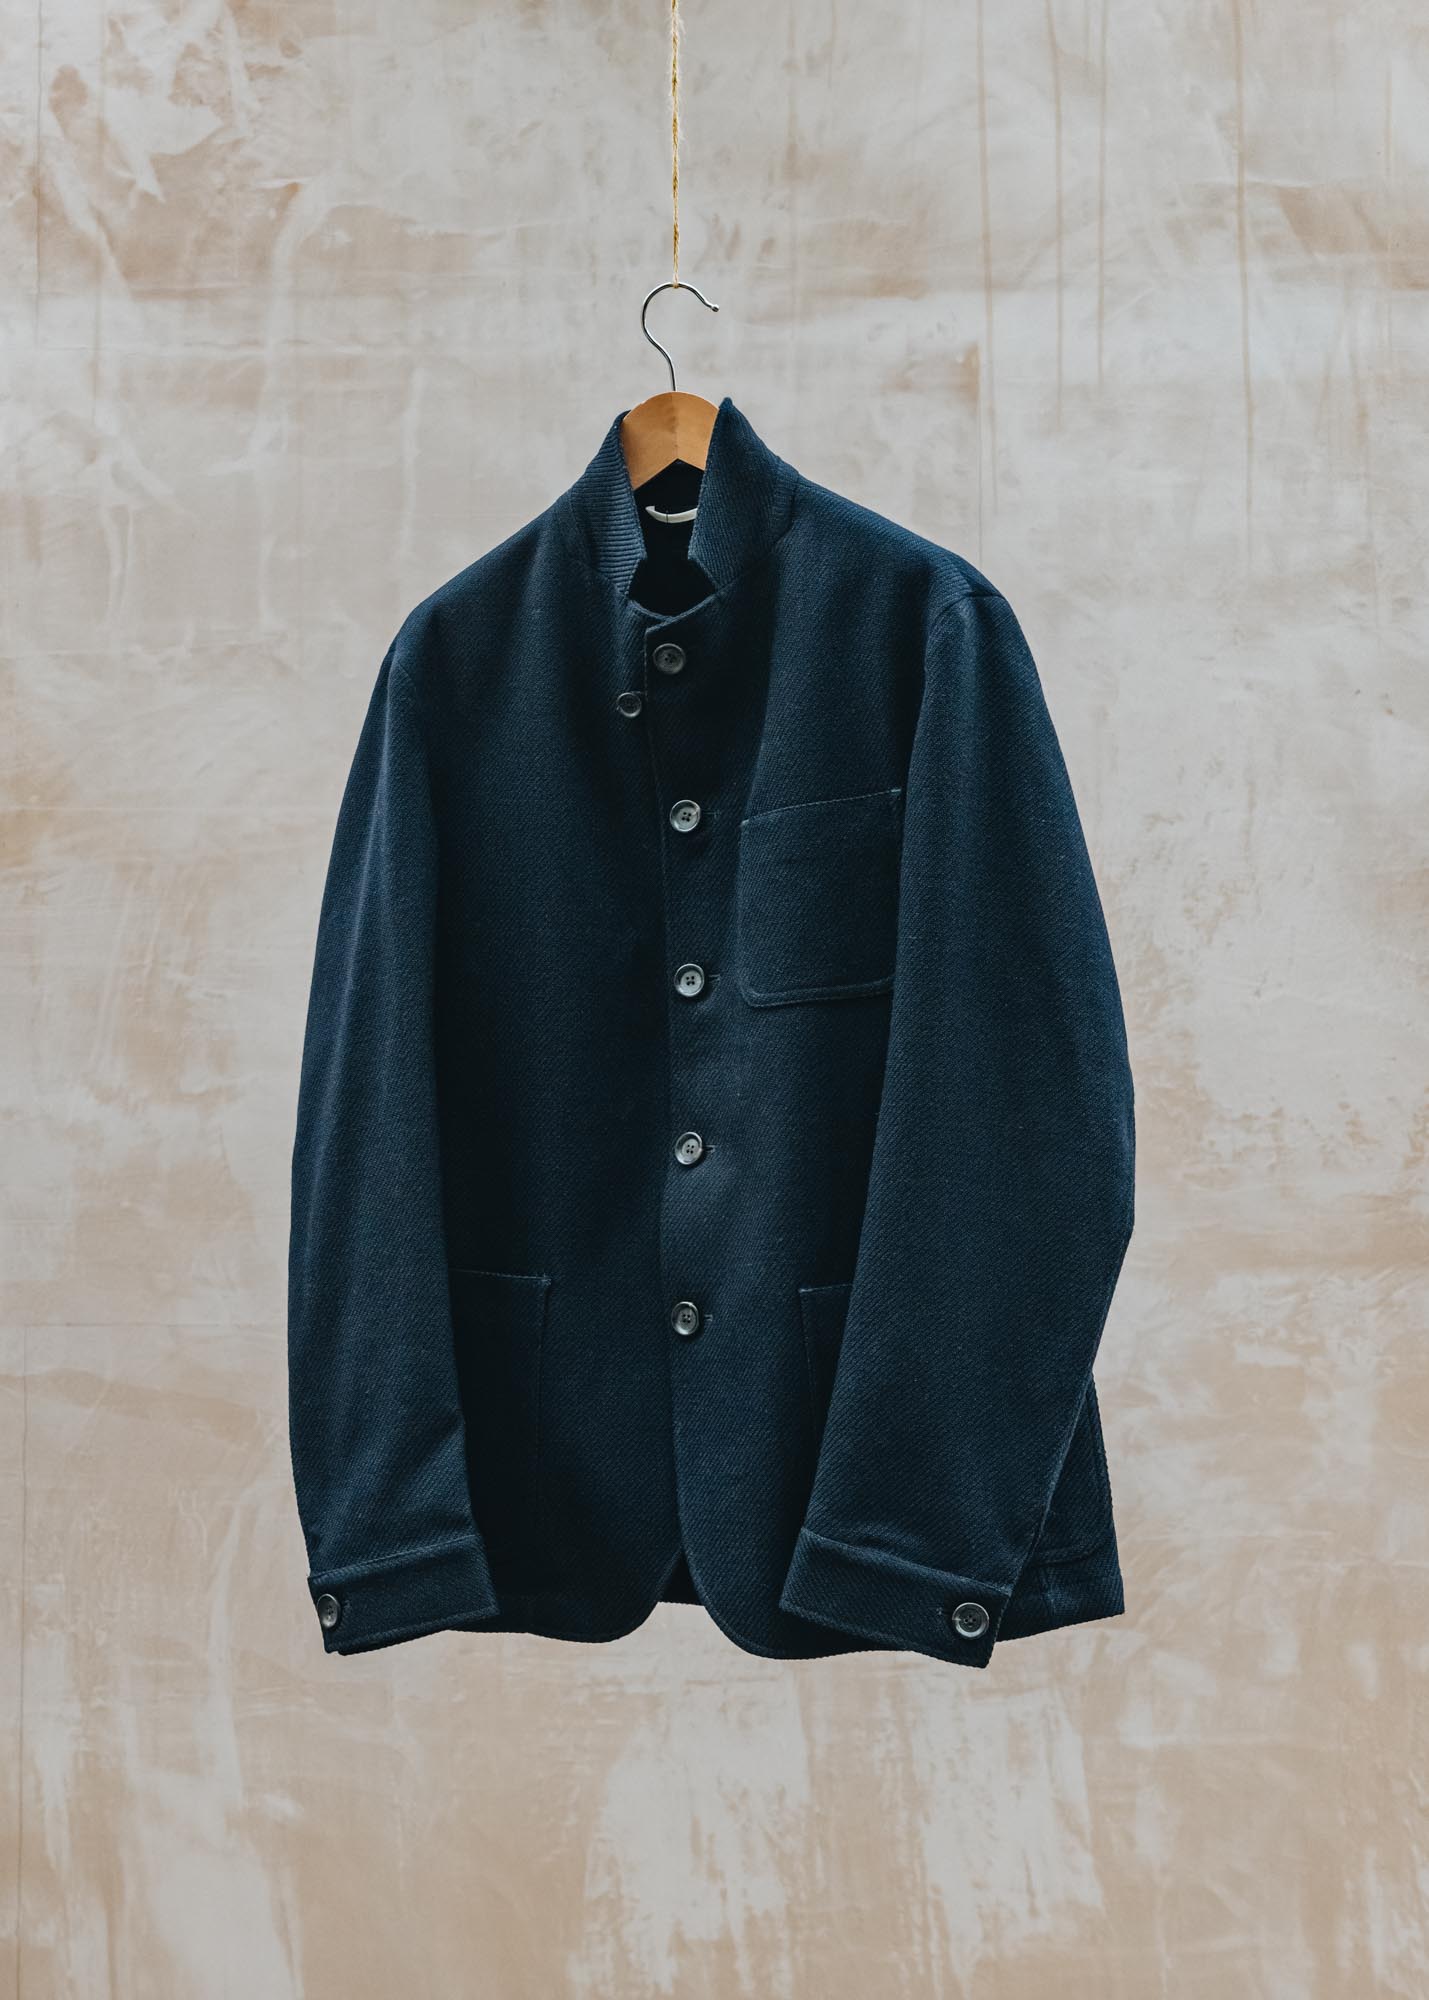 Oliver Spencer Solms Jacket in Buttress Midnight